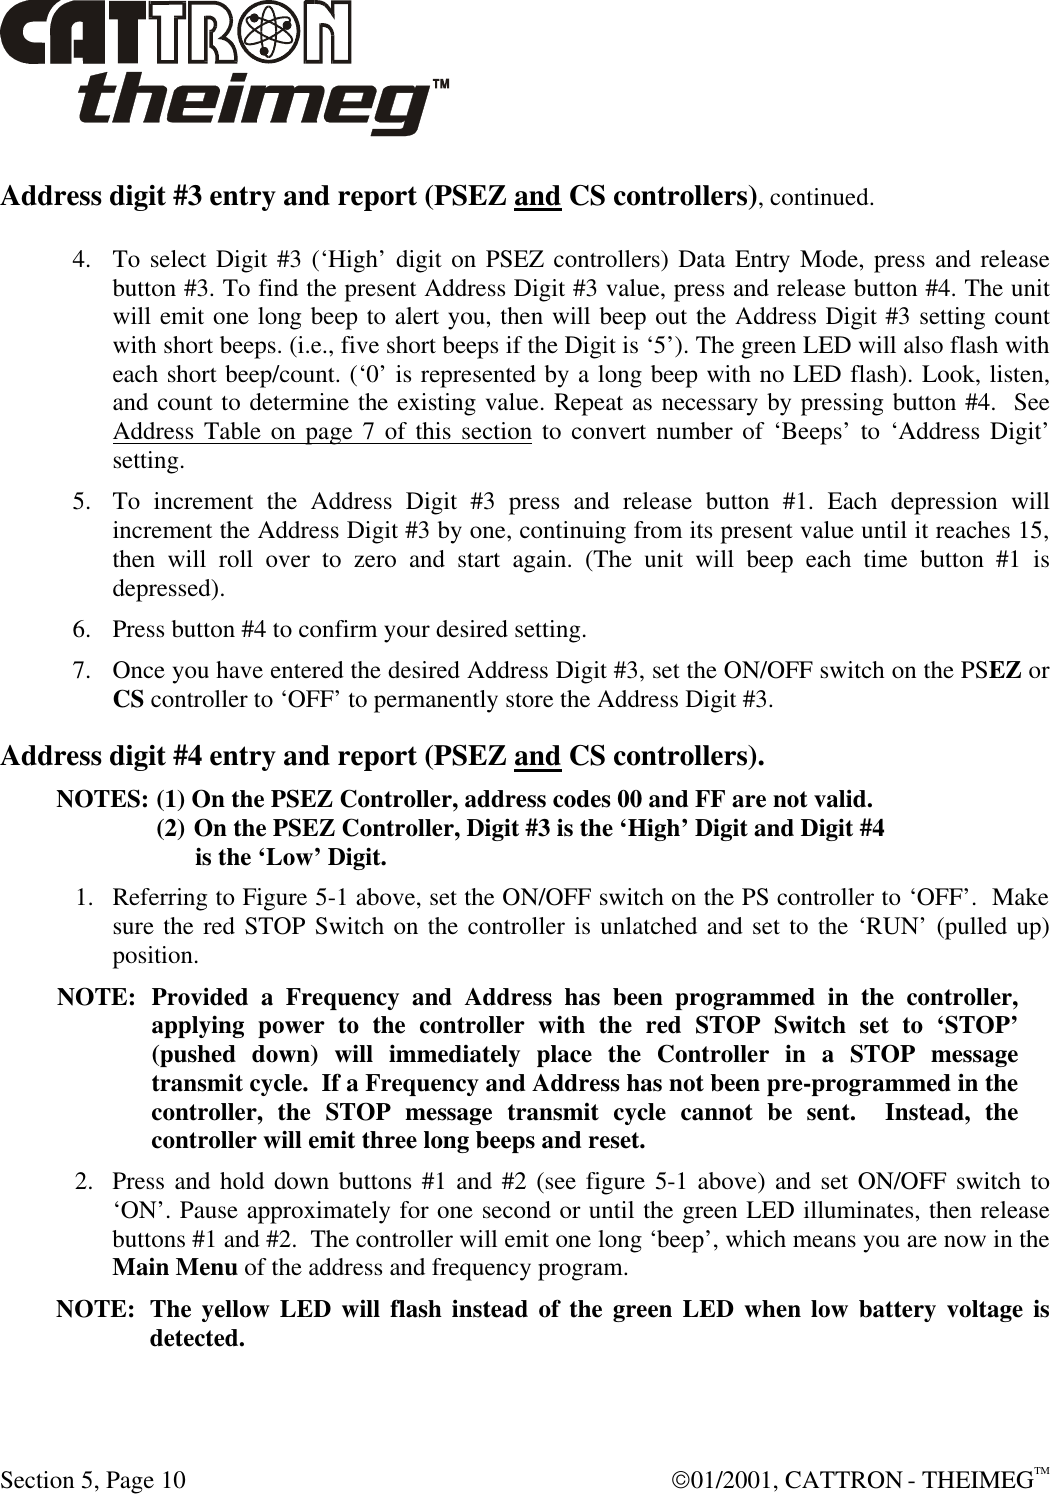  Section 5, Page 10  01/2001, CATTRON - THEIMEGTM Address digit #3 entry and report (PSEZ and CS controllers), continued. 4. To select Digit #3 (‘High’ digit on PSEZ controllers) Data Entry Mode, press and release button #3. To find the present Address Digit #3 value, press and release button #4. The unit will emit one long beep to alert you, then will beep out the Address Digit #3 setting count with short beeps. (i.e., five short beeps if the Digit is ‘5’). The green LED will also flash with each short beep/count. (‘0’ is represented by a long beep with no LED flash). Look, listen, and count to determine the existing value. Repeat as necessary by pressing button #4.  See Address Table on page 7 of this section to convert number of ‘Beeps’ to ‘Address Digit’ setting. 5. To increment the Address Digit #3 press and release button #1. Each depression will increment the Address Digit #3 by one, continuing from its present value until it reaches 15, then will roll over to zero and start again. (The unit will beep each time button #1 is depressed). 6. Press button #4 to confirm your desired setting. 7. Once you have entered the desired Address Digit #3, set the ON/OFF switch on the PSEZ or CS controller to ‘OFF’ to permanently store the Address Digit #3. Address digit #4 entry and report (PSEZ and CS controllers). NOTES:  (1) On the PSEZ Controller, address codes 00 and FF are not valid. (2) On the PSEZ Controller, Digit #3 is the ‘High’ Digit and Digit #4               is the ‘Low’ Digit. 1. Referring to Figure 5-1 above, set the ON/OFF switch on the PS controller to ‘OFF’.  Make sure the red STOP Switch on the controller is unlatched and set to the ‘RUN’ (pulled up) position.  NOTE: Provided a Frequency and Address has been programmed in the controller, applying power to the controller with the red STOP Switch set to ‘STOP’ (pushed down) will immediately place the Controller in a STOP message transmit cycle.  If a Frequency and Address has not been pre-programmed in the controller, the STOP message transmit cycle cannot be sent.  Instead, the controller will emit three long beeps and reset.  2. Press and hold down buttons #1 and #2 (see figure 5-1 above) and set ON/OFF switch to ‘ON’. Pause approximately for one second or until the green LED illuminates, then release buttons #1 and #2.  The controller will emit one long ‘beep’, which means you are now in the Main Menu of the address and frequency program.   NOTE: The yellow LED will flash instead of the green LED when low battery voltage is detected. 